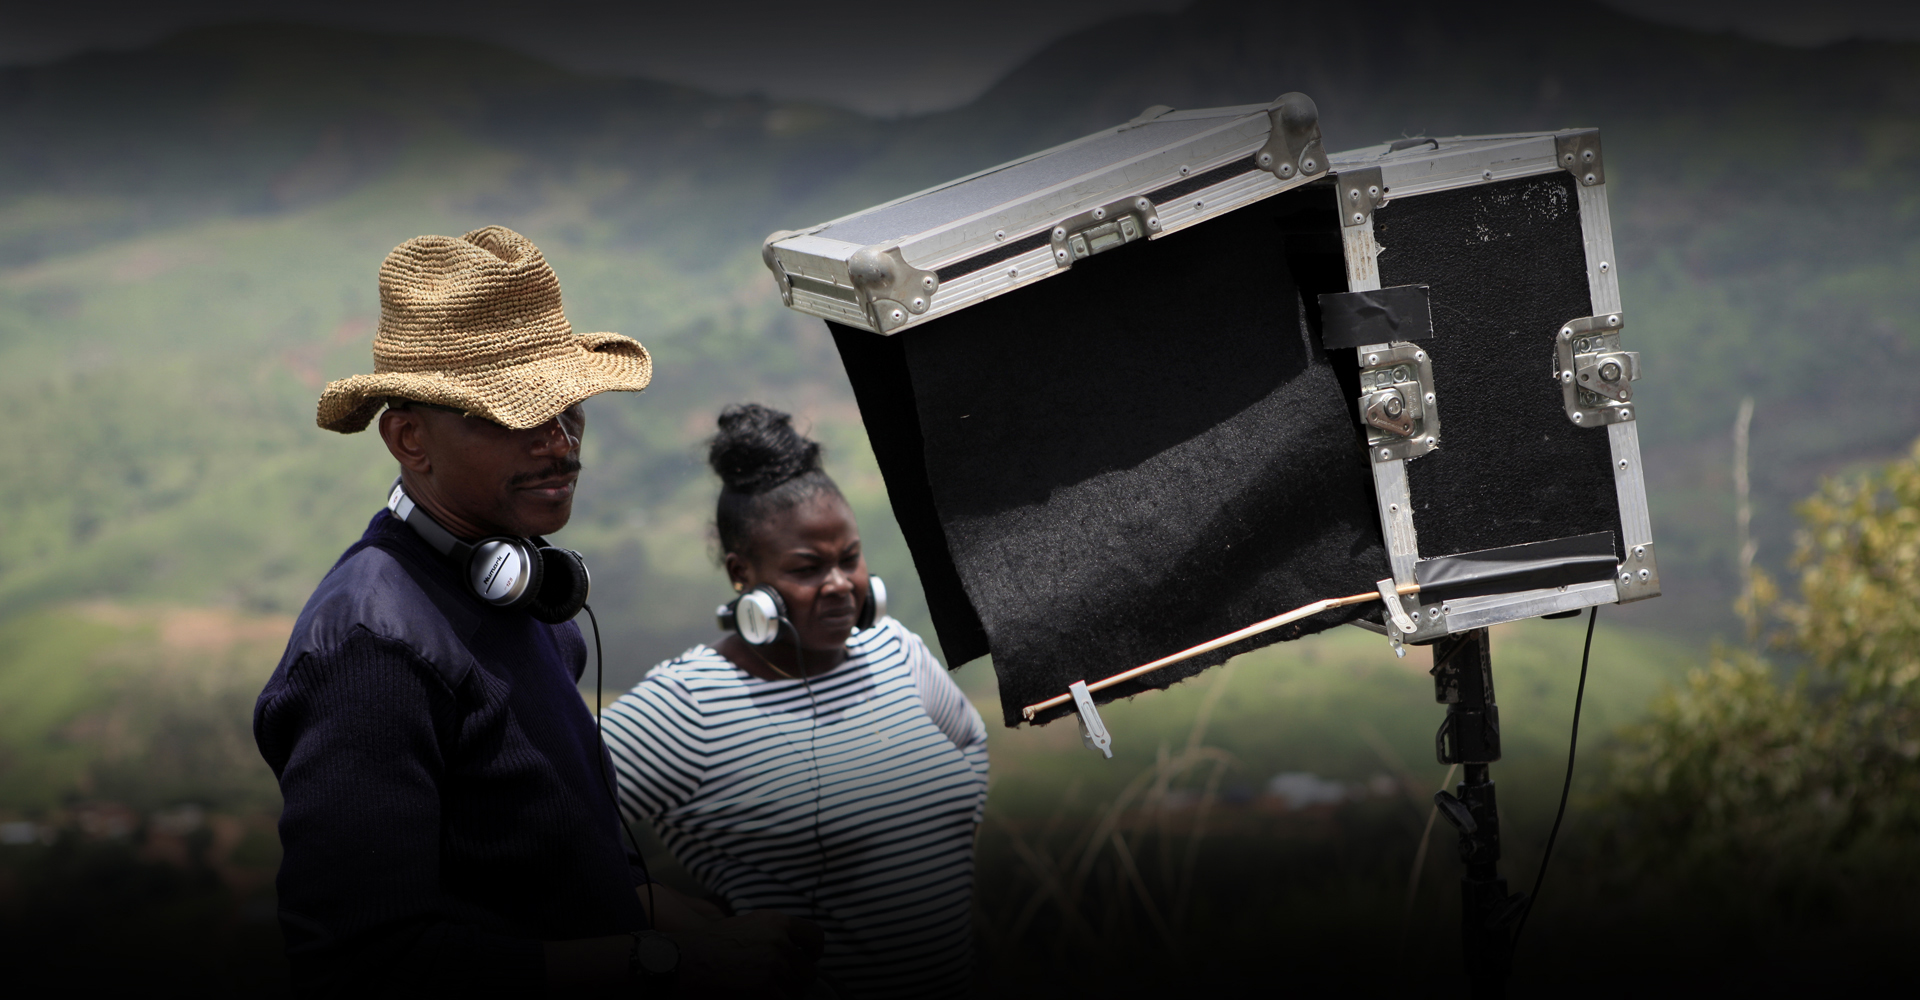 Desmond Ovbiagele with crew on the set of The Milkmaid in Mambilla Plateau, Taraba State, Nigeria